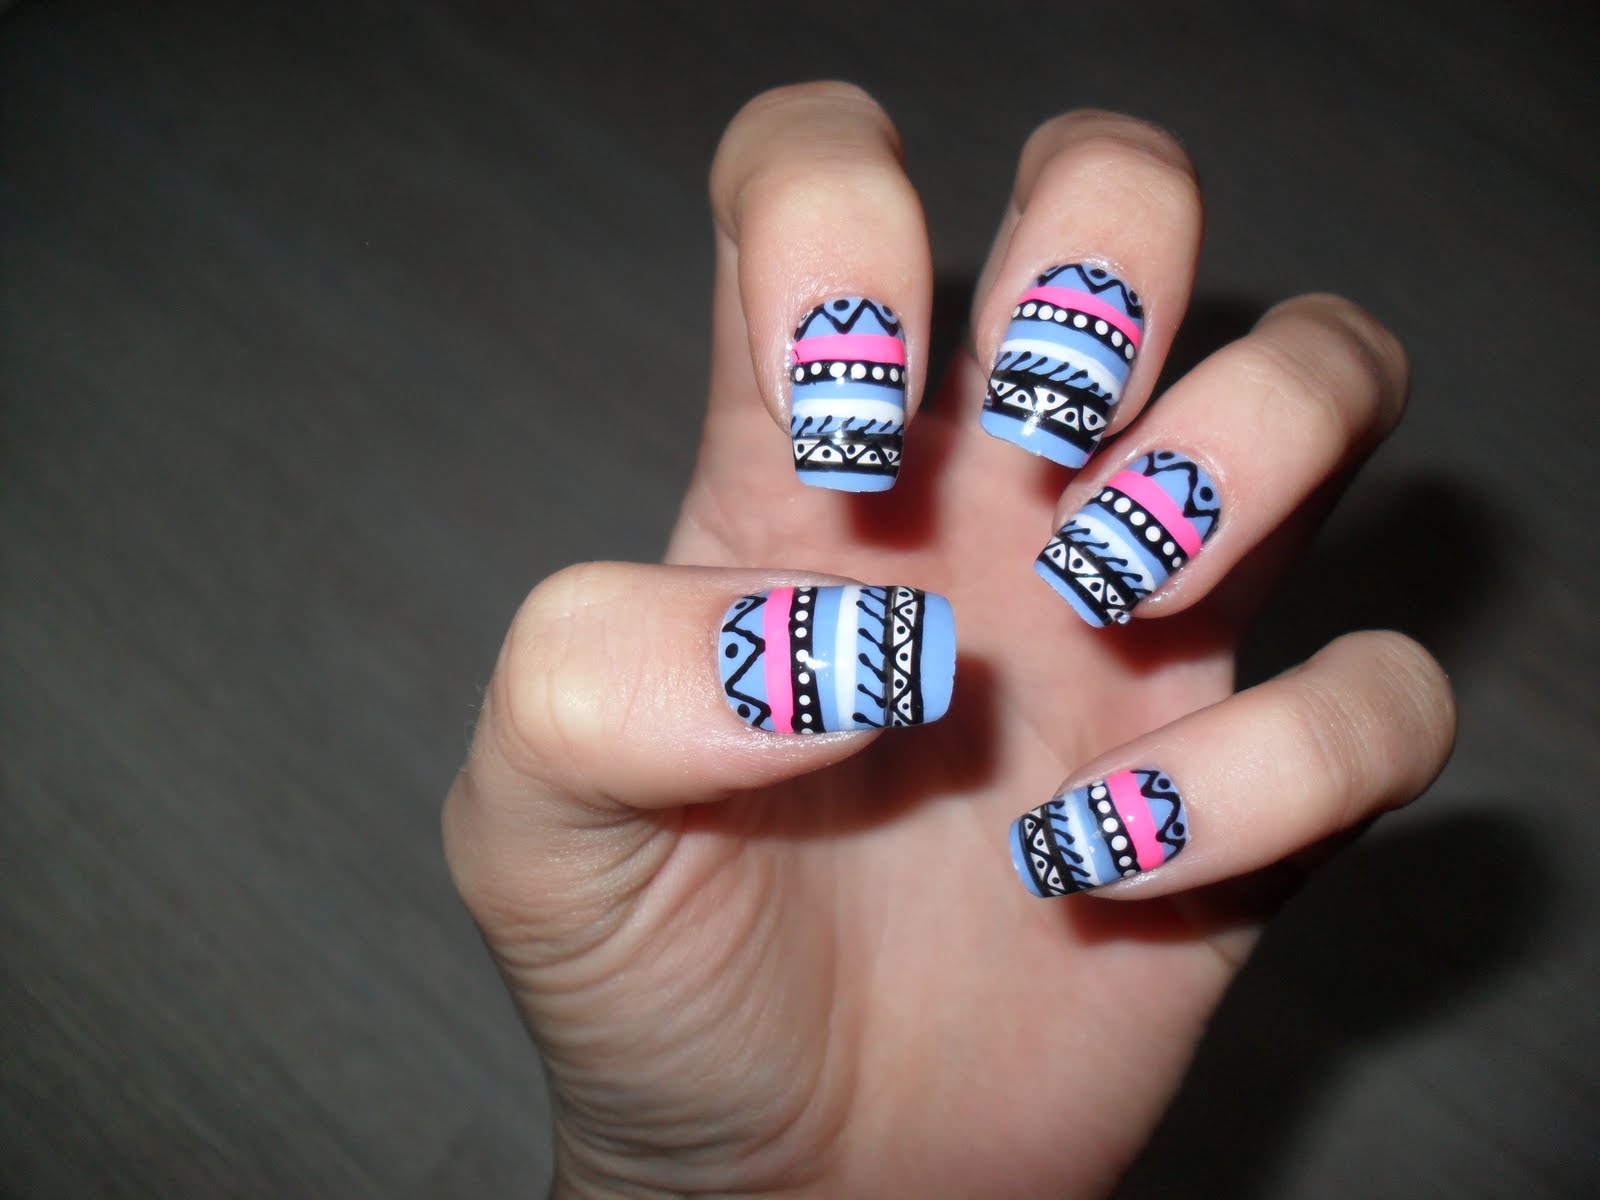 Todays nail art is my absolute favorite nail design